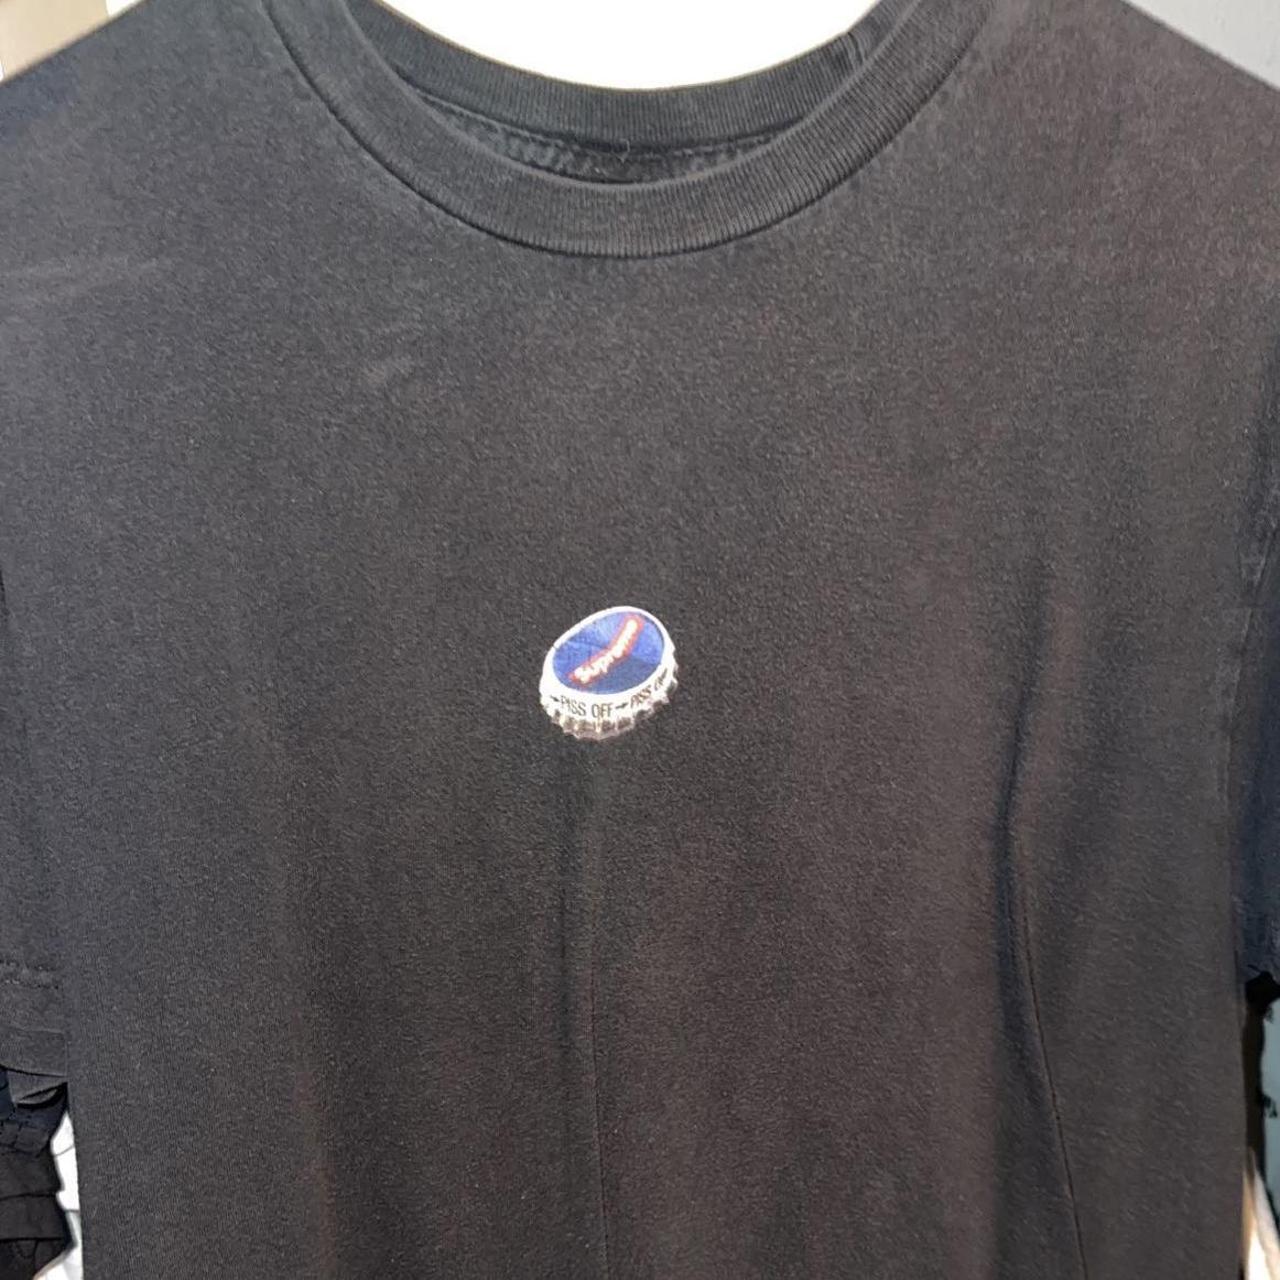 Supreme Bottle Cap Tee, Size M, Pre-Owned, #supreme...